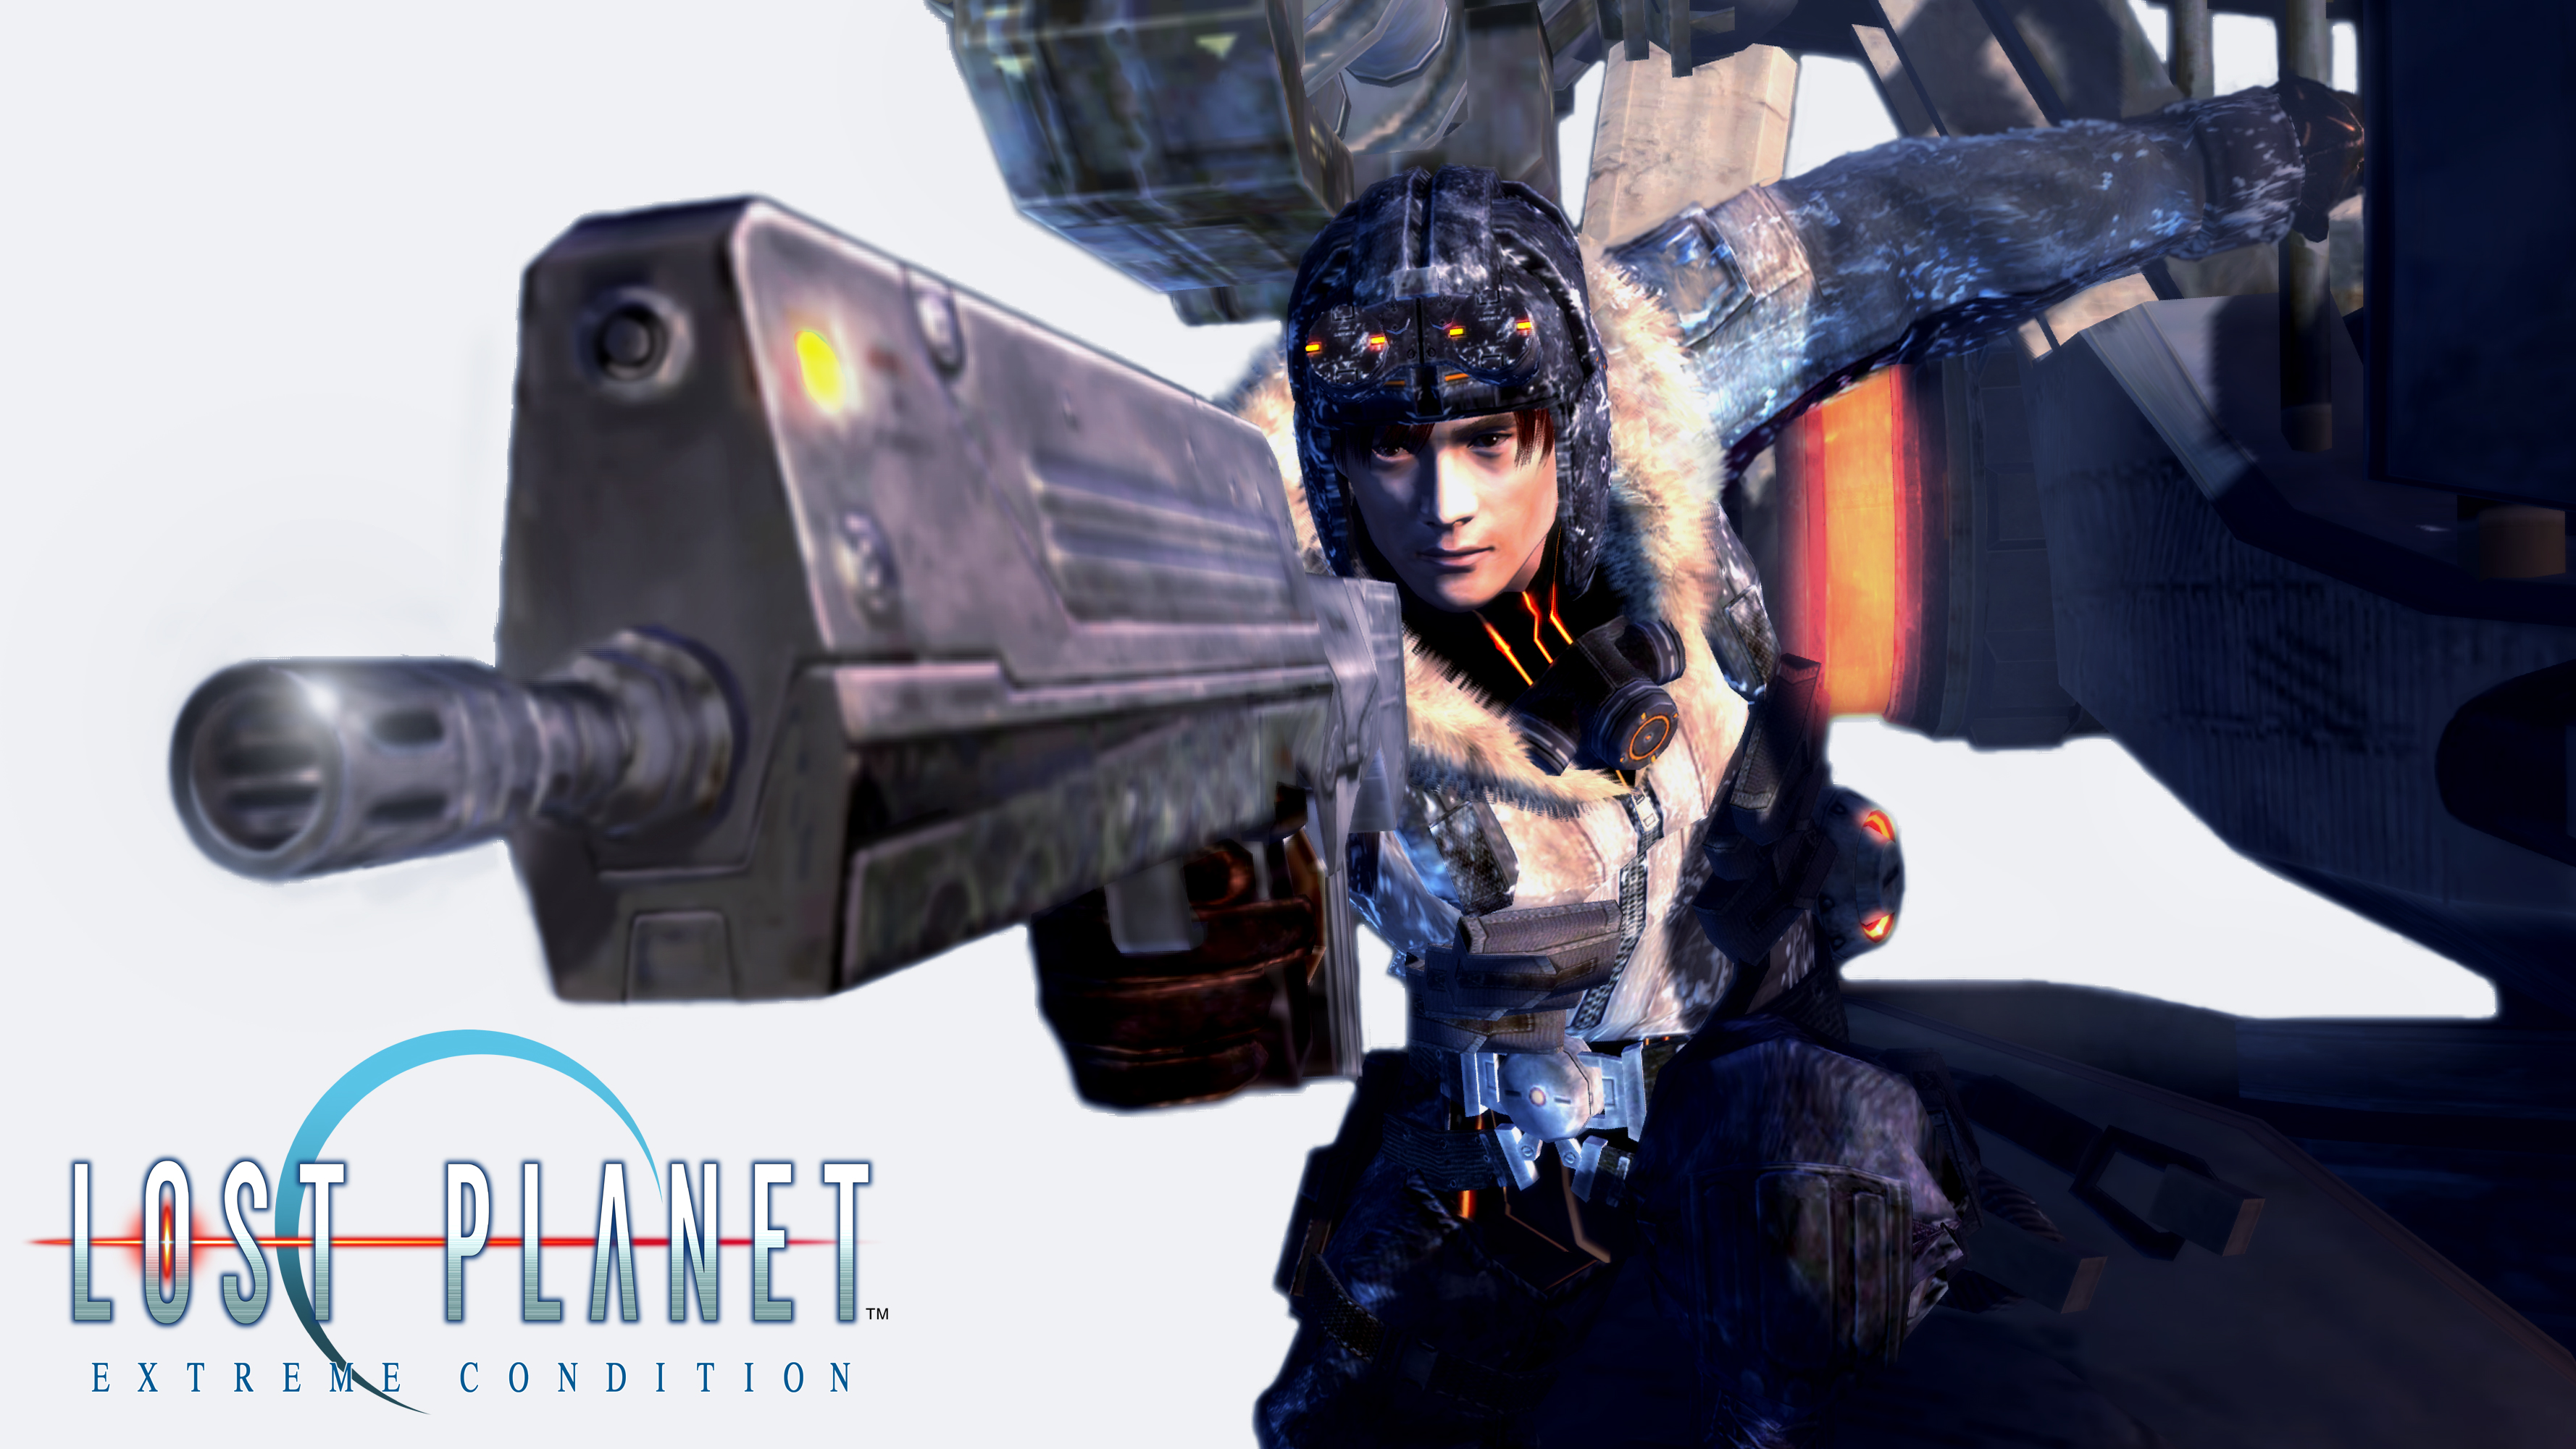 Lost planet colonies steam фото 84